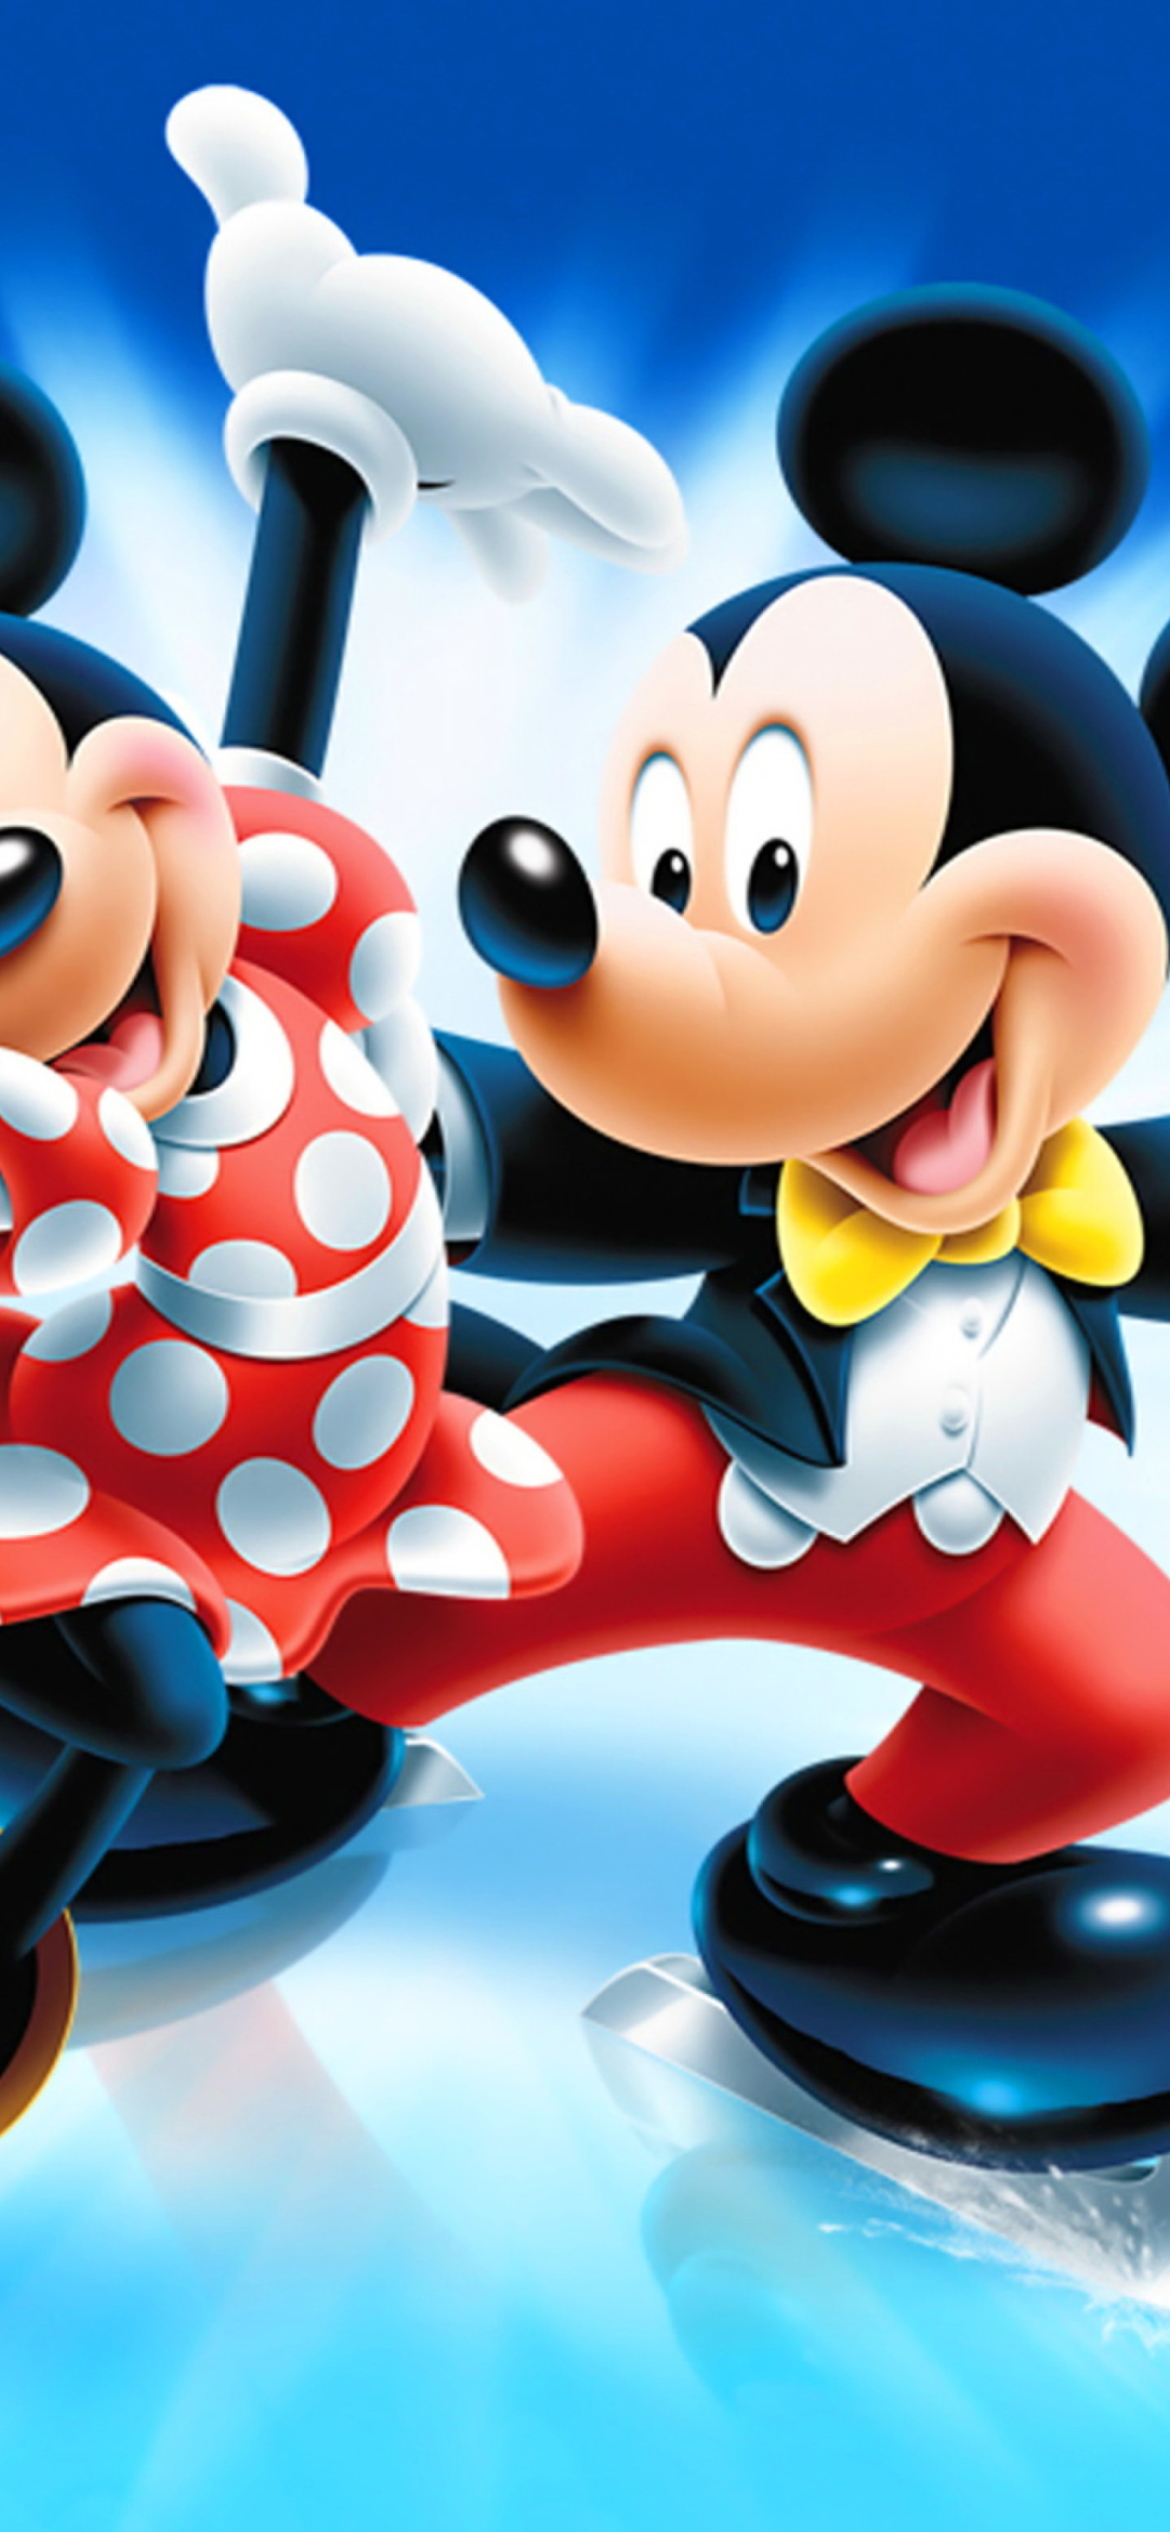 6 Mickey Mouse Phone Wallpapers to Make Your Phone a Mouseterpiece  D23